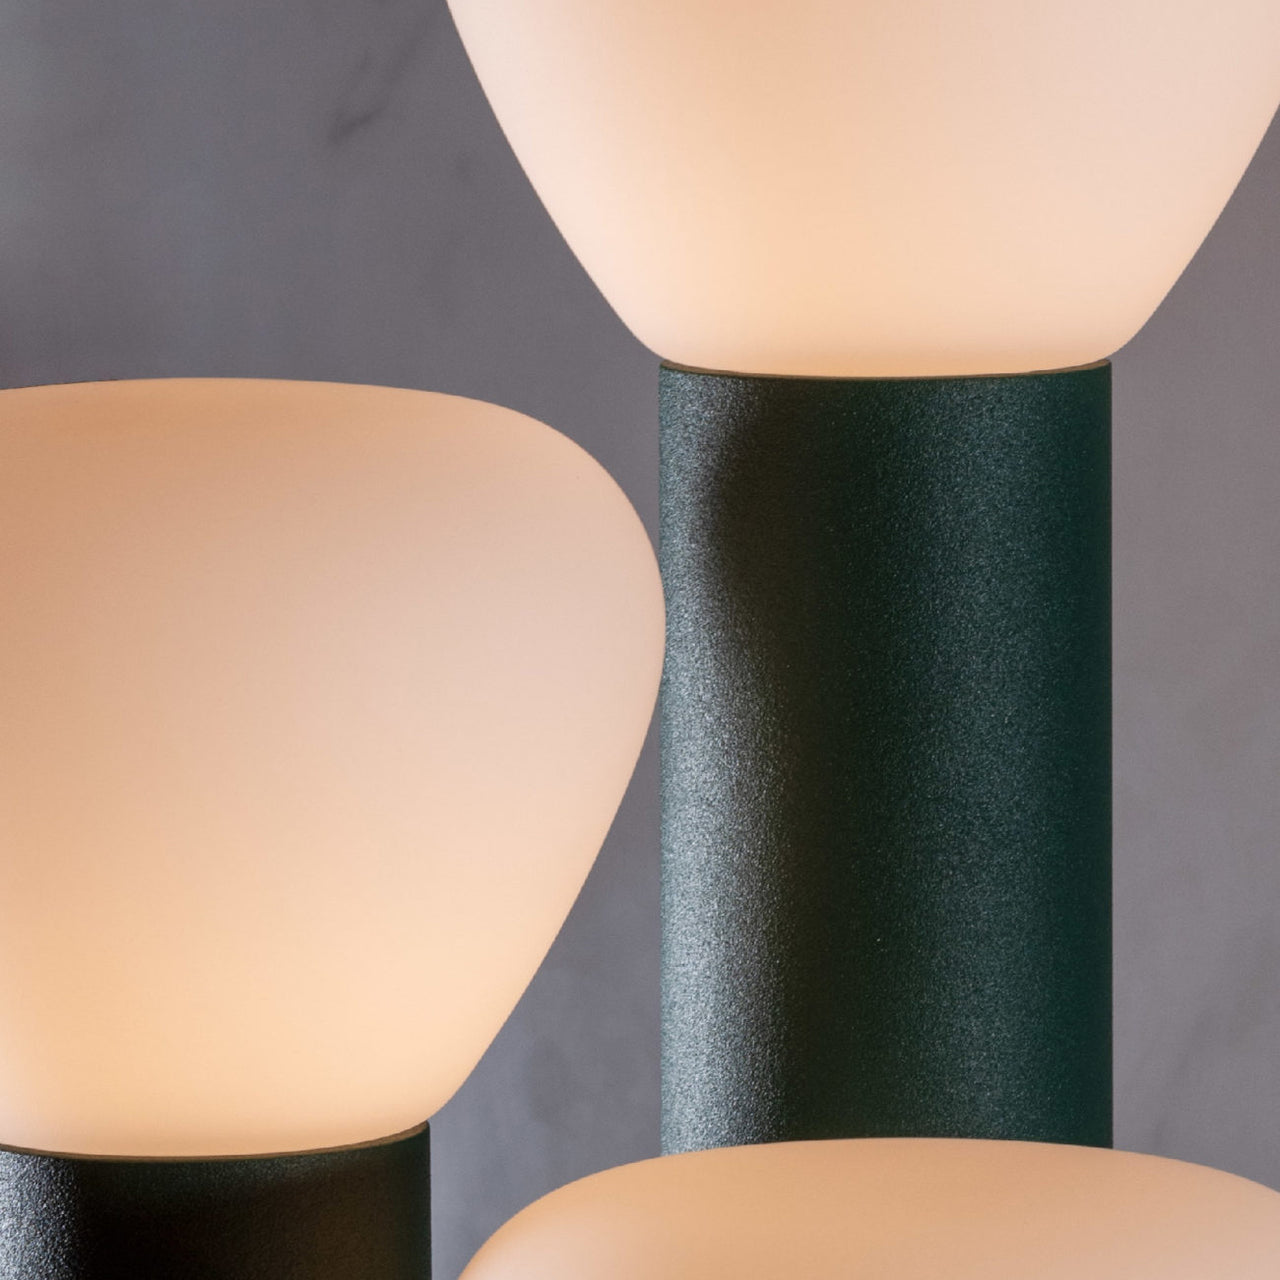 Parc 06 Table Lamp: Footswitch